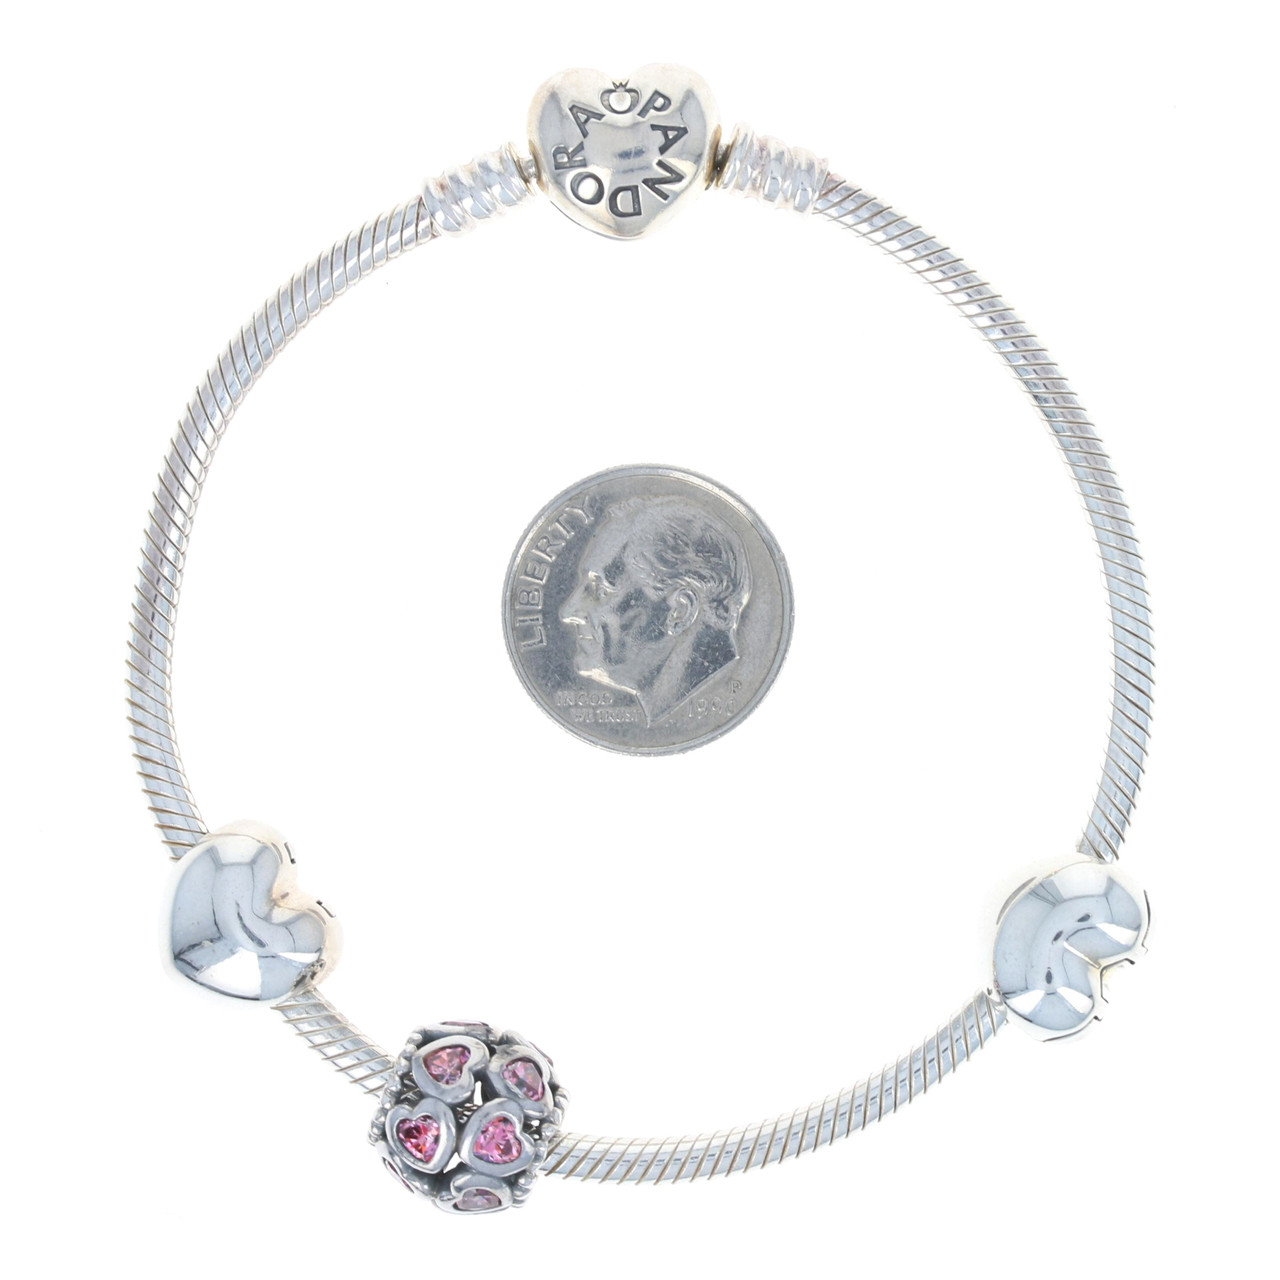 New Pandora From the Heart Ltd Charm Bracelet Gift Set USB793019 Sterling - Wilson Brothers Jewelry